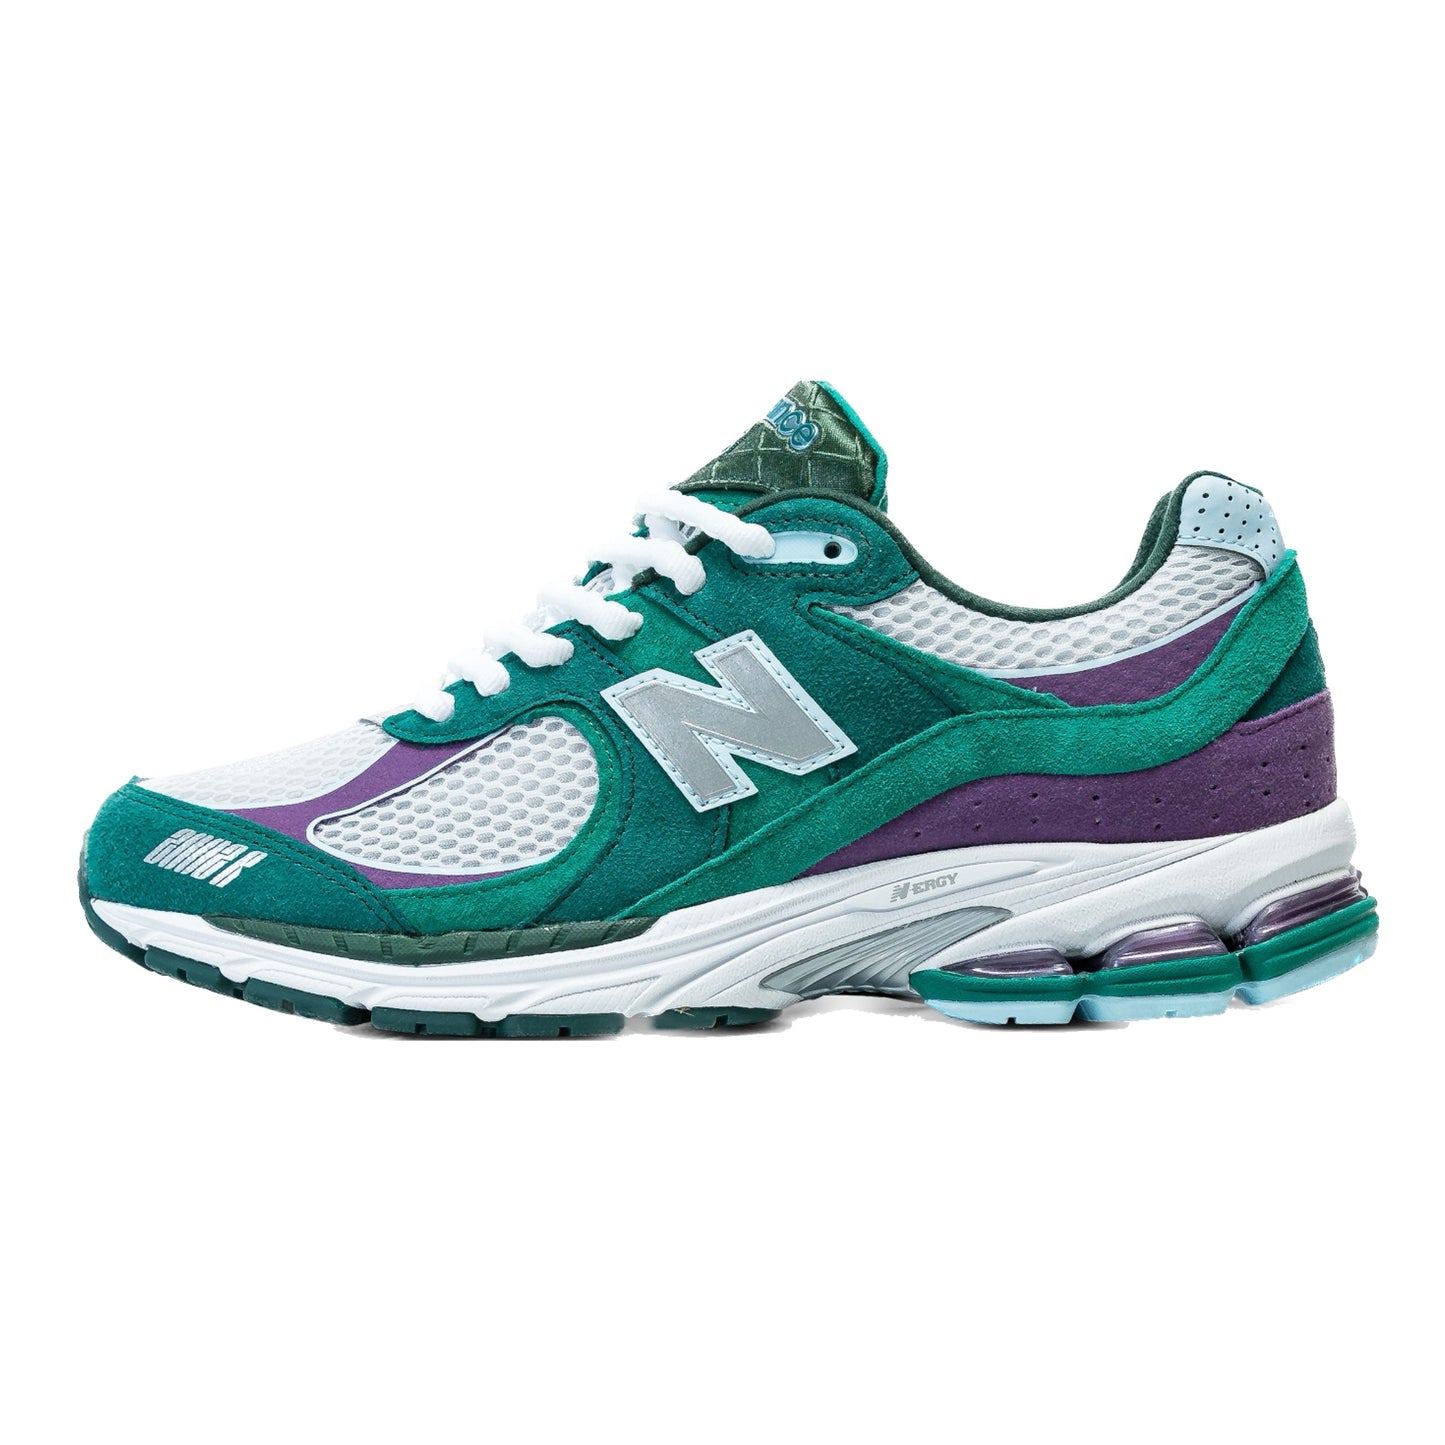 New Balance 2002R Up There Backyeard Legends Green Purple Grey